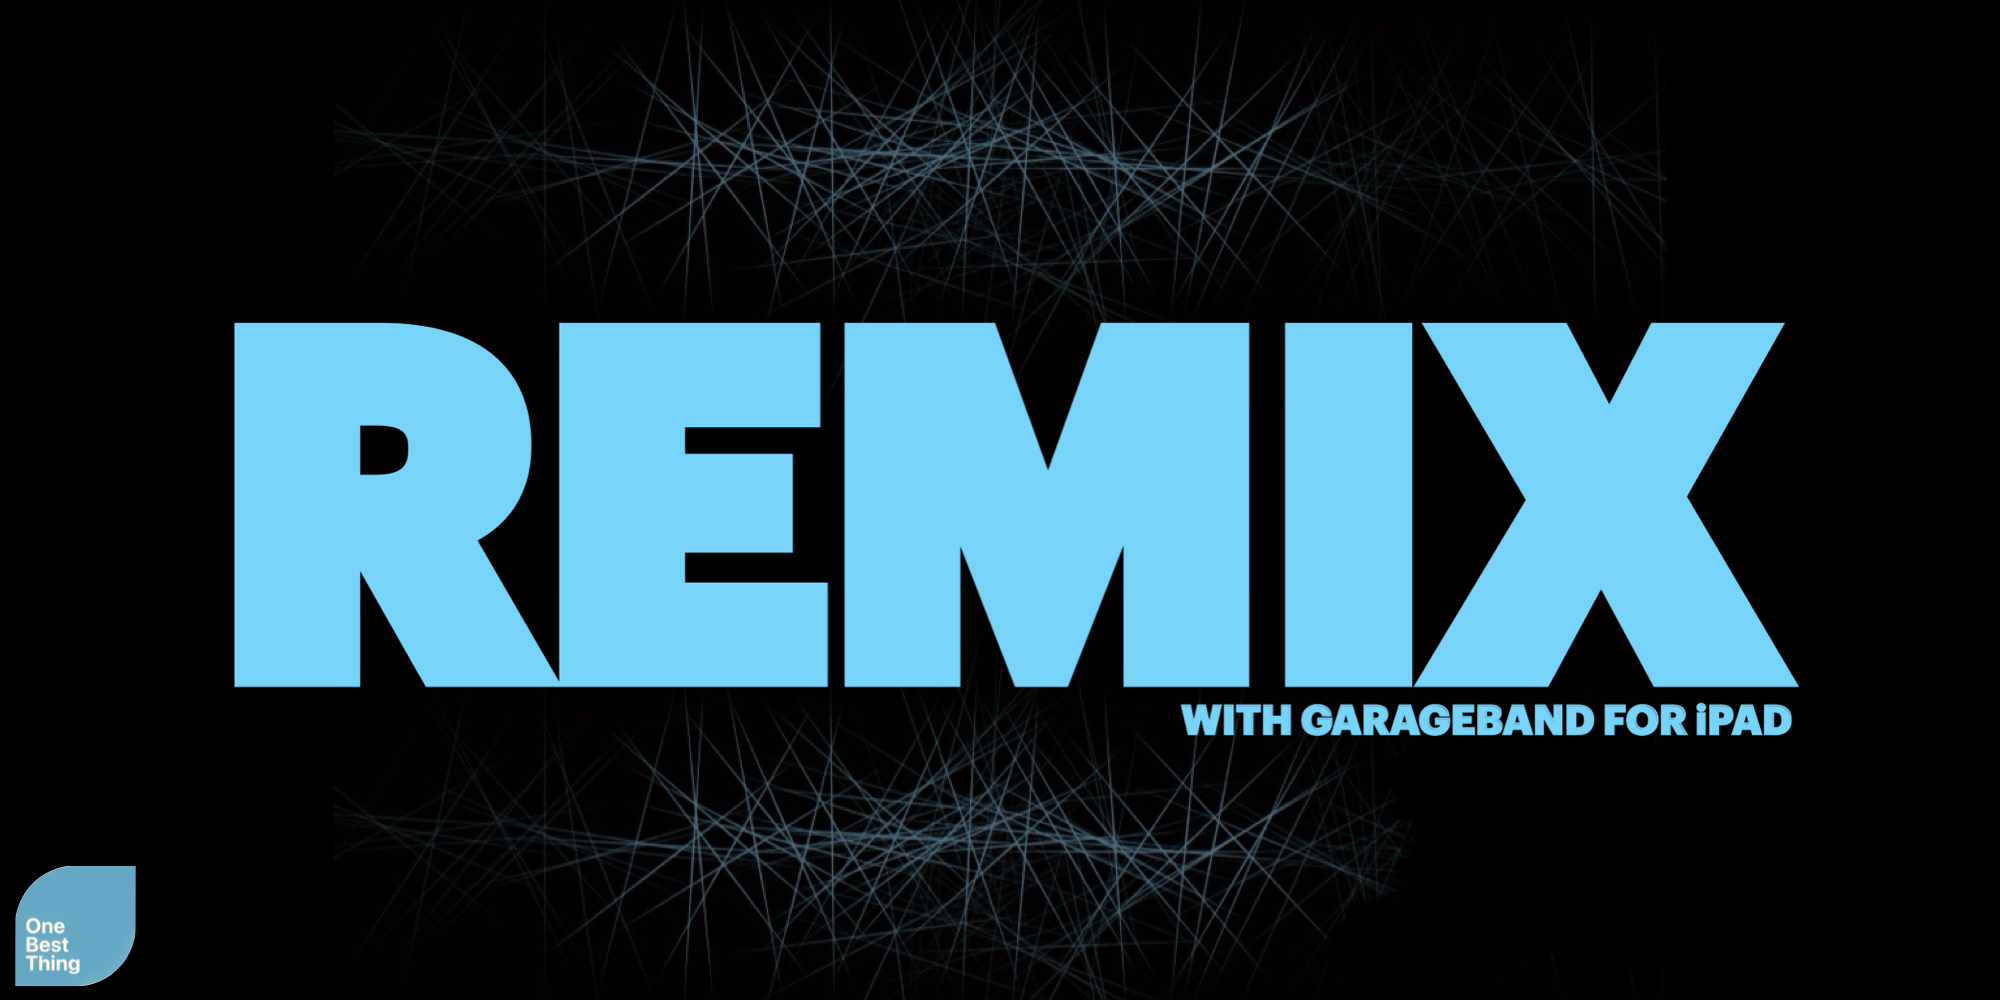 Text reads: Remix with GarageBand for iPad. In Light blue, against a dark background.